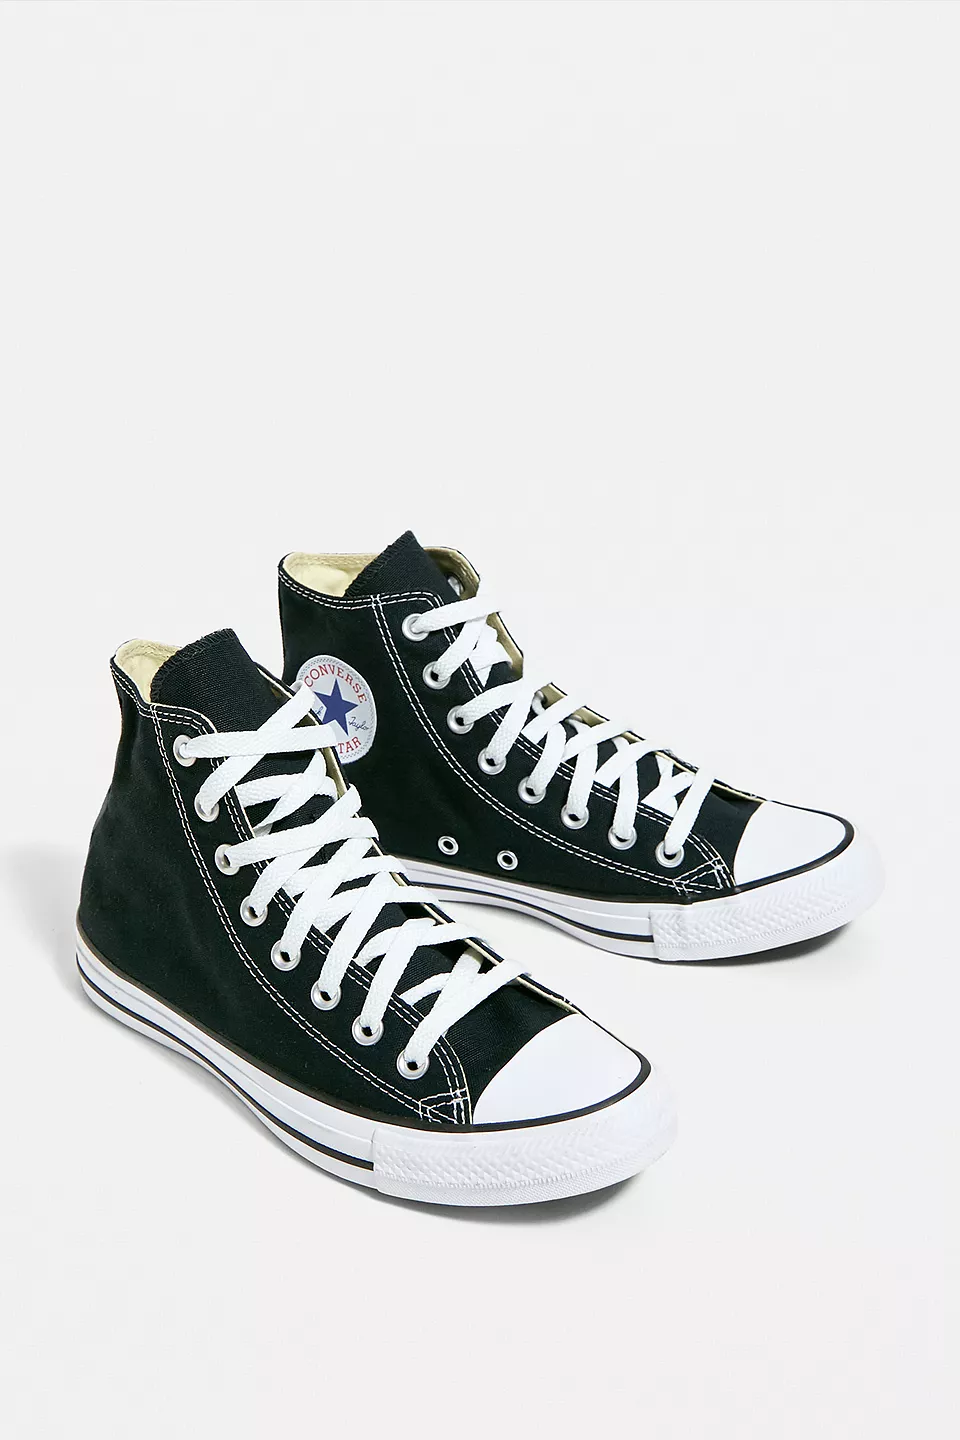 urbanoutfitters.com | Converse Chuck Taylor All Star Black High-Top Trainers